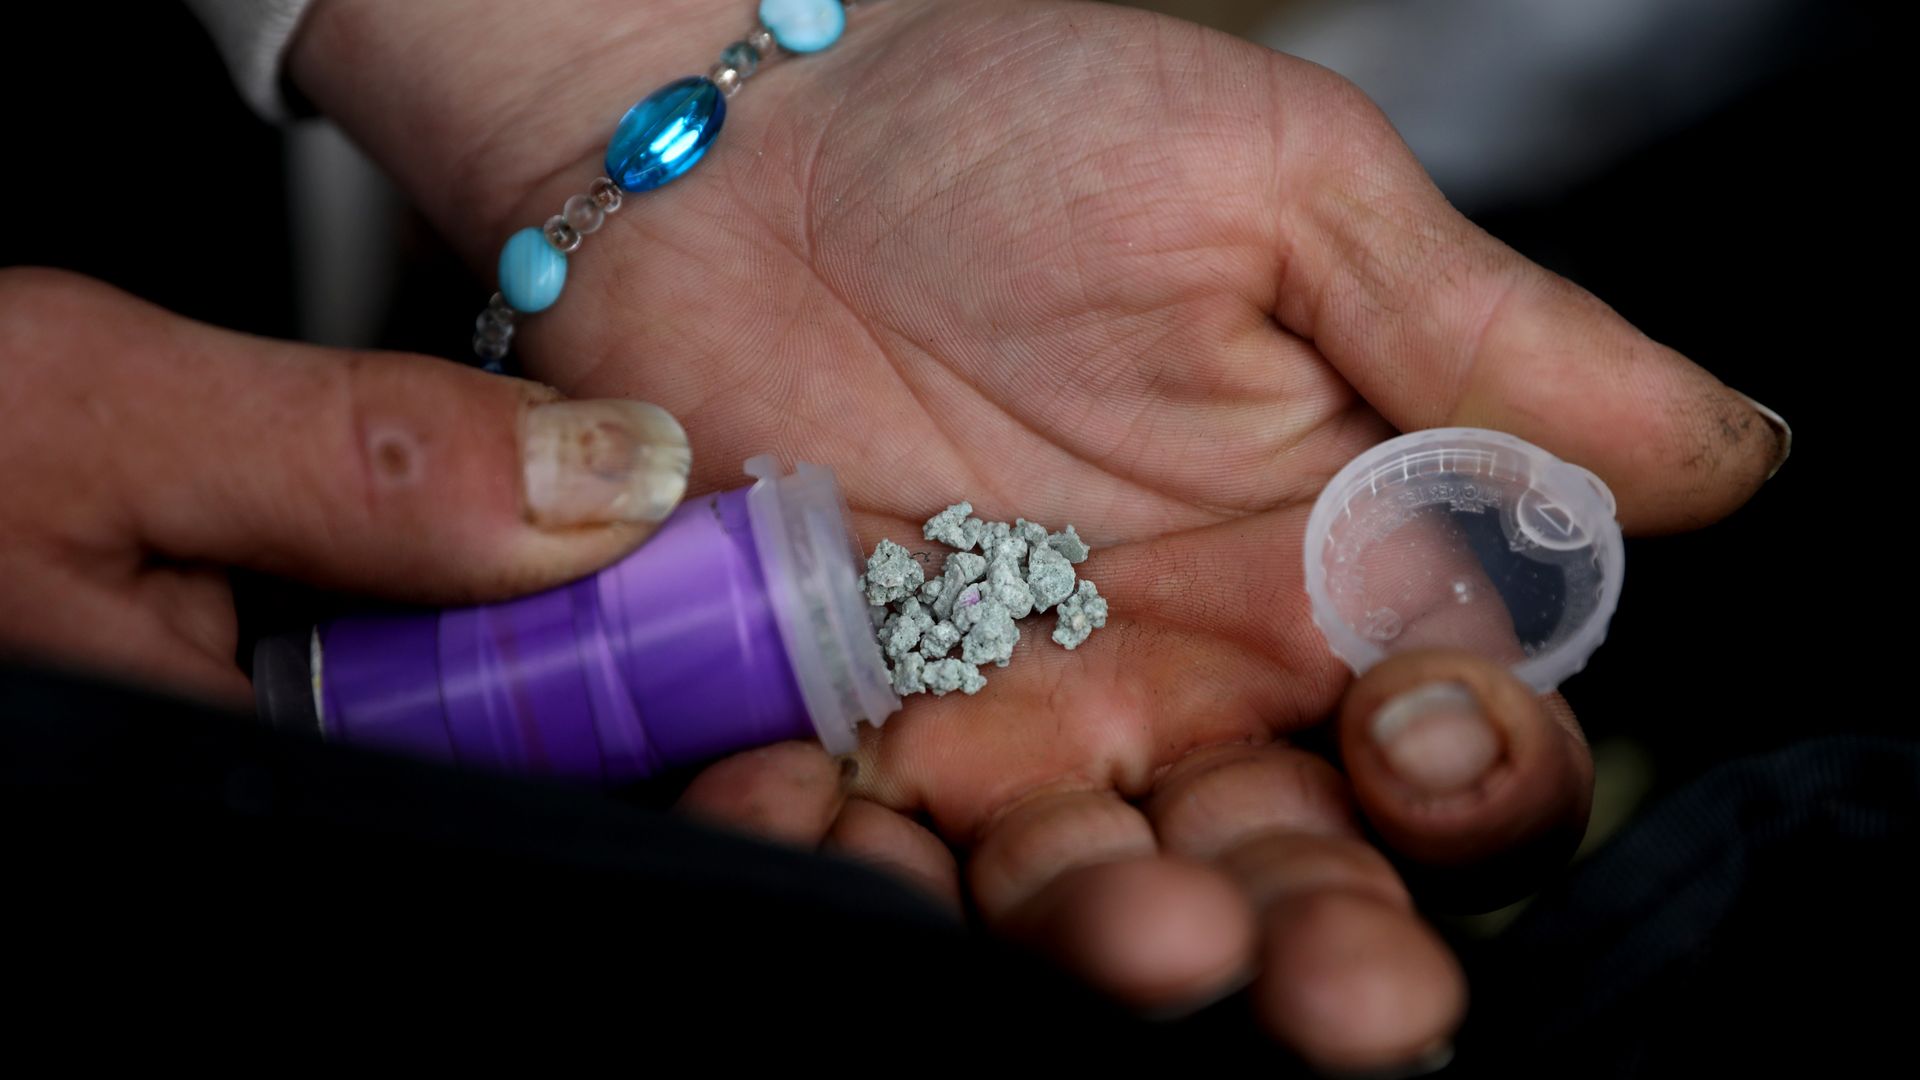 A hand holding fentanyl.